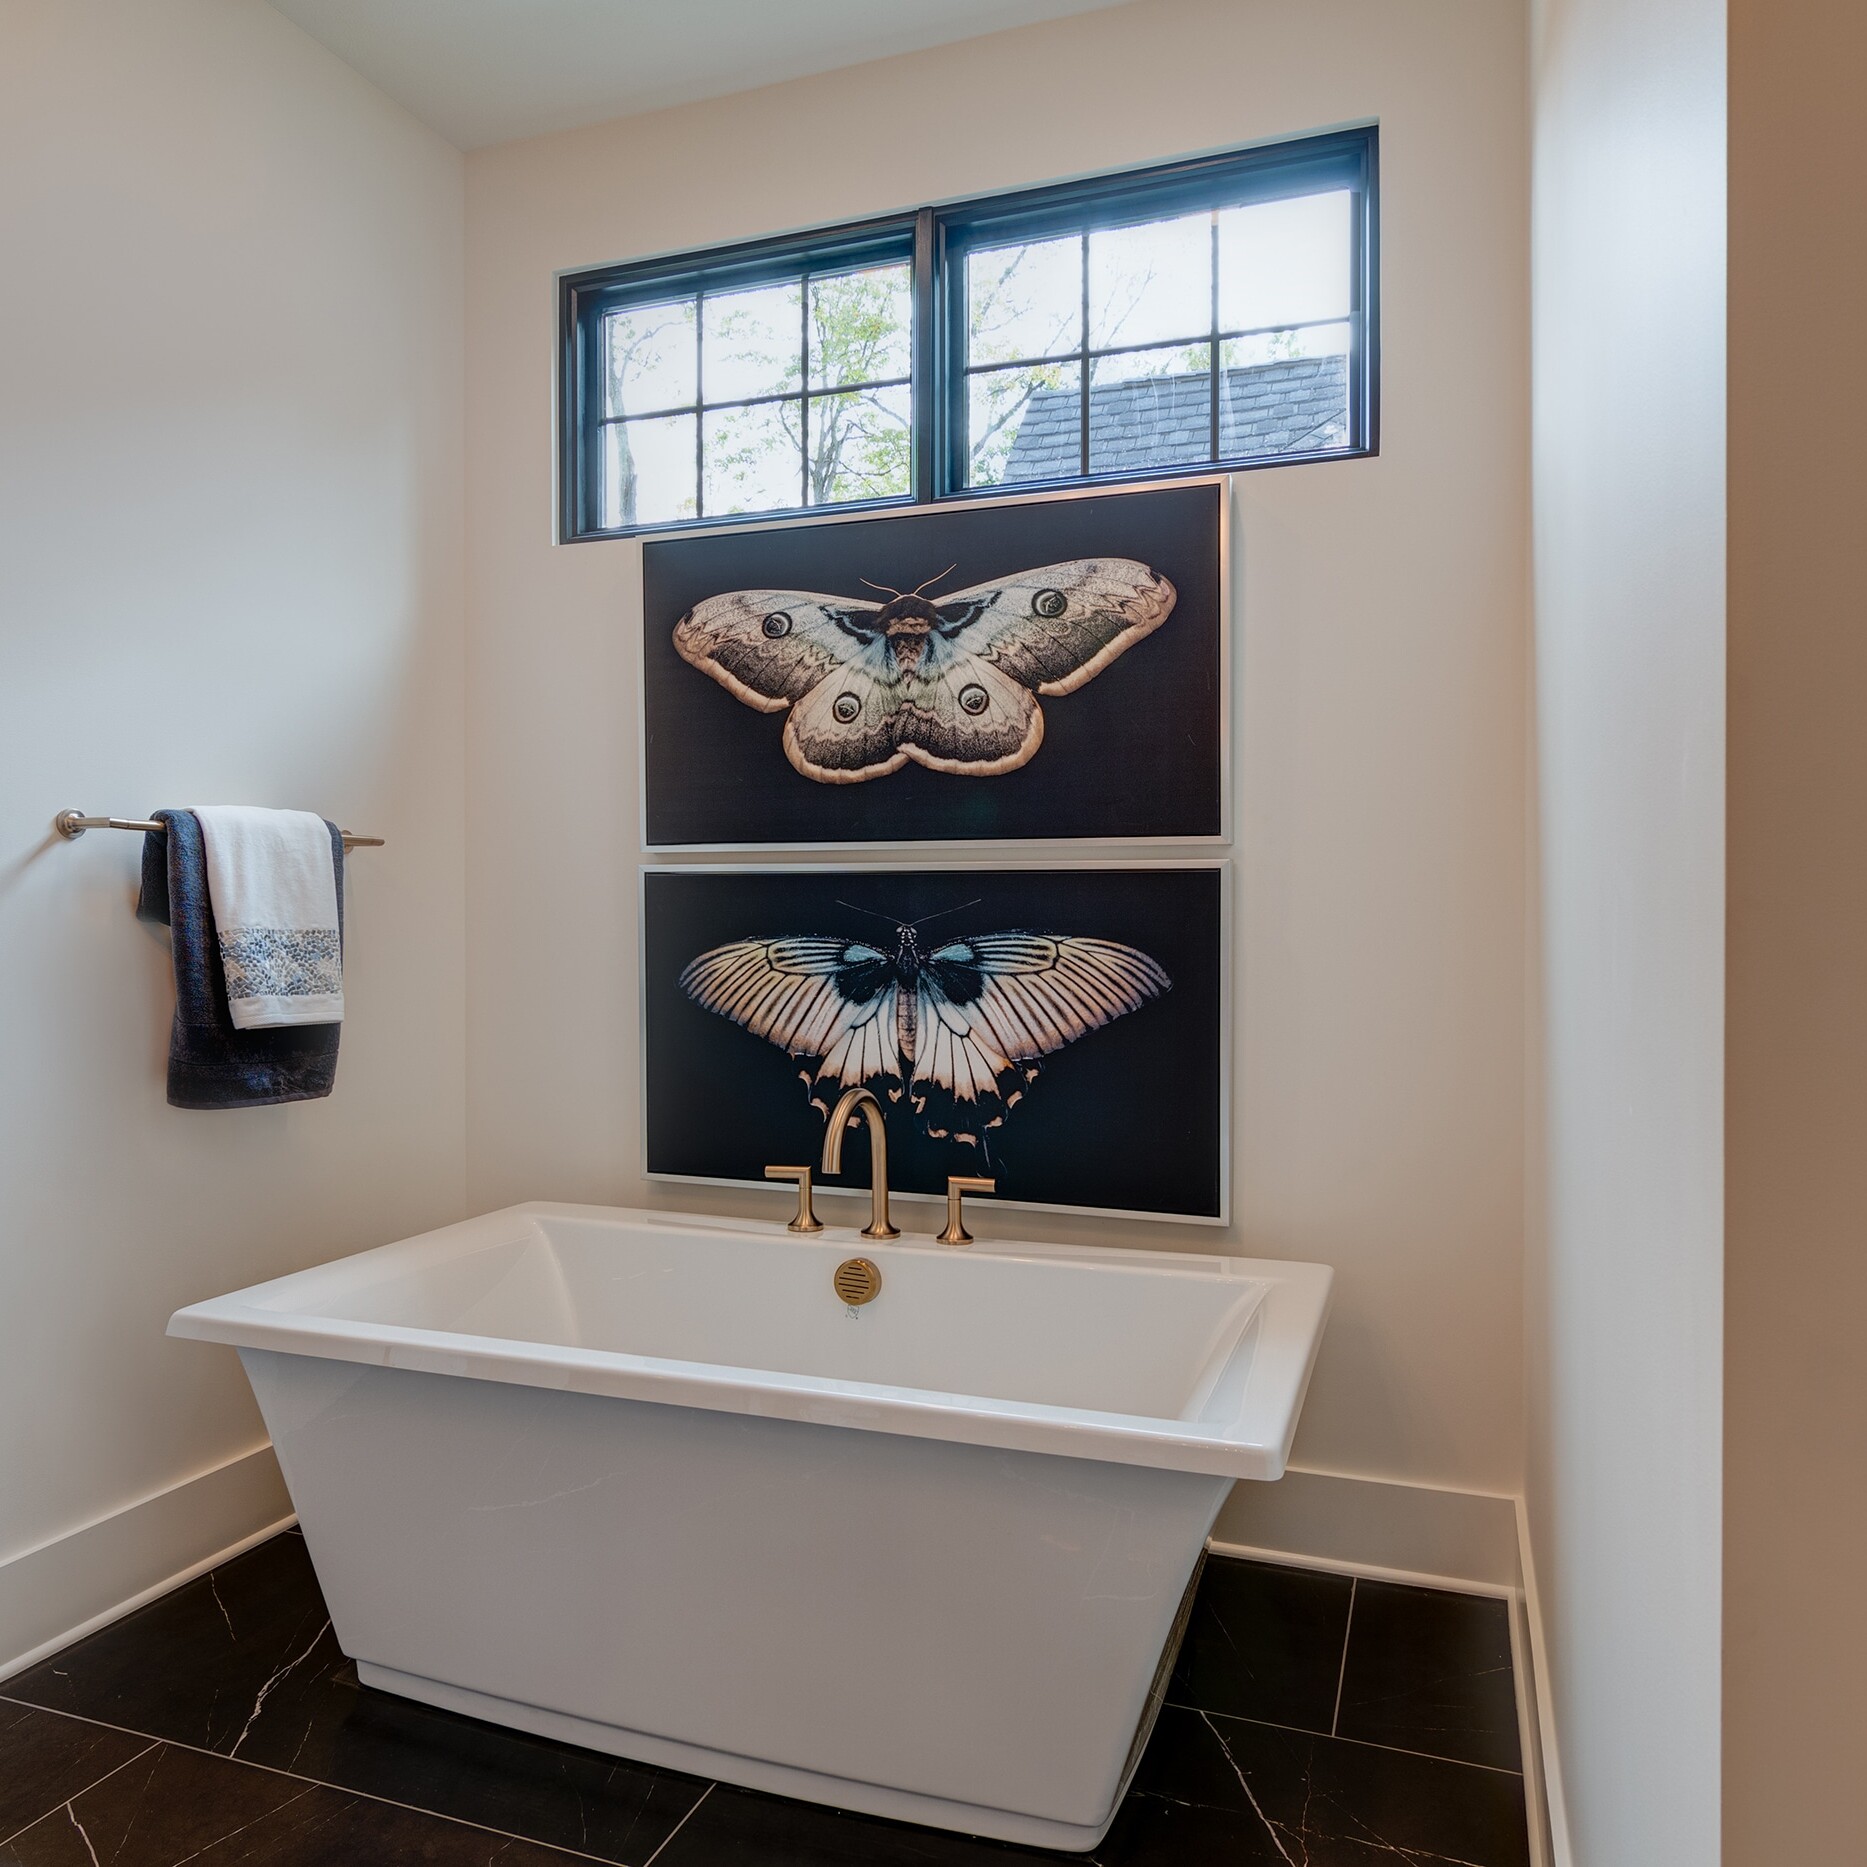 A bathroom with a large tub and two paintings on the wall.